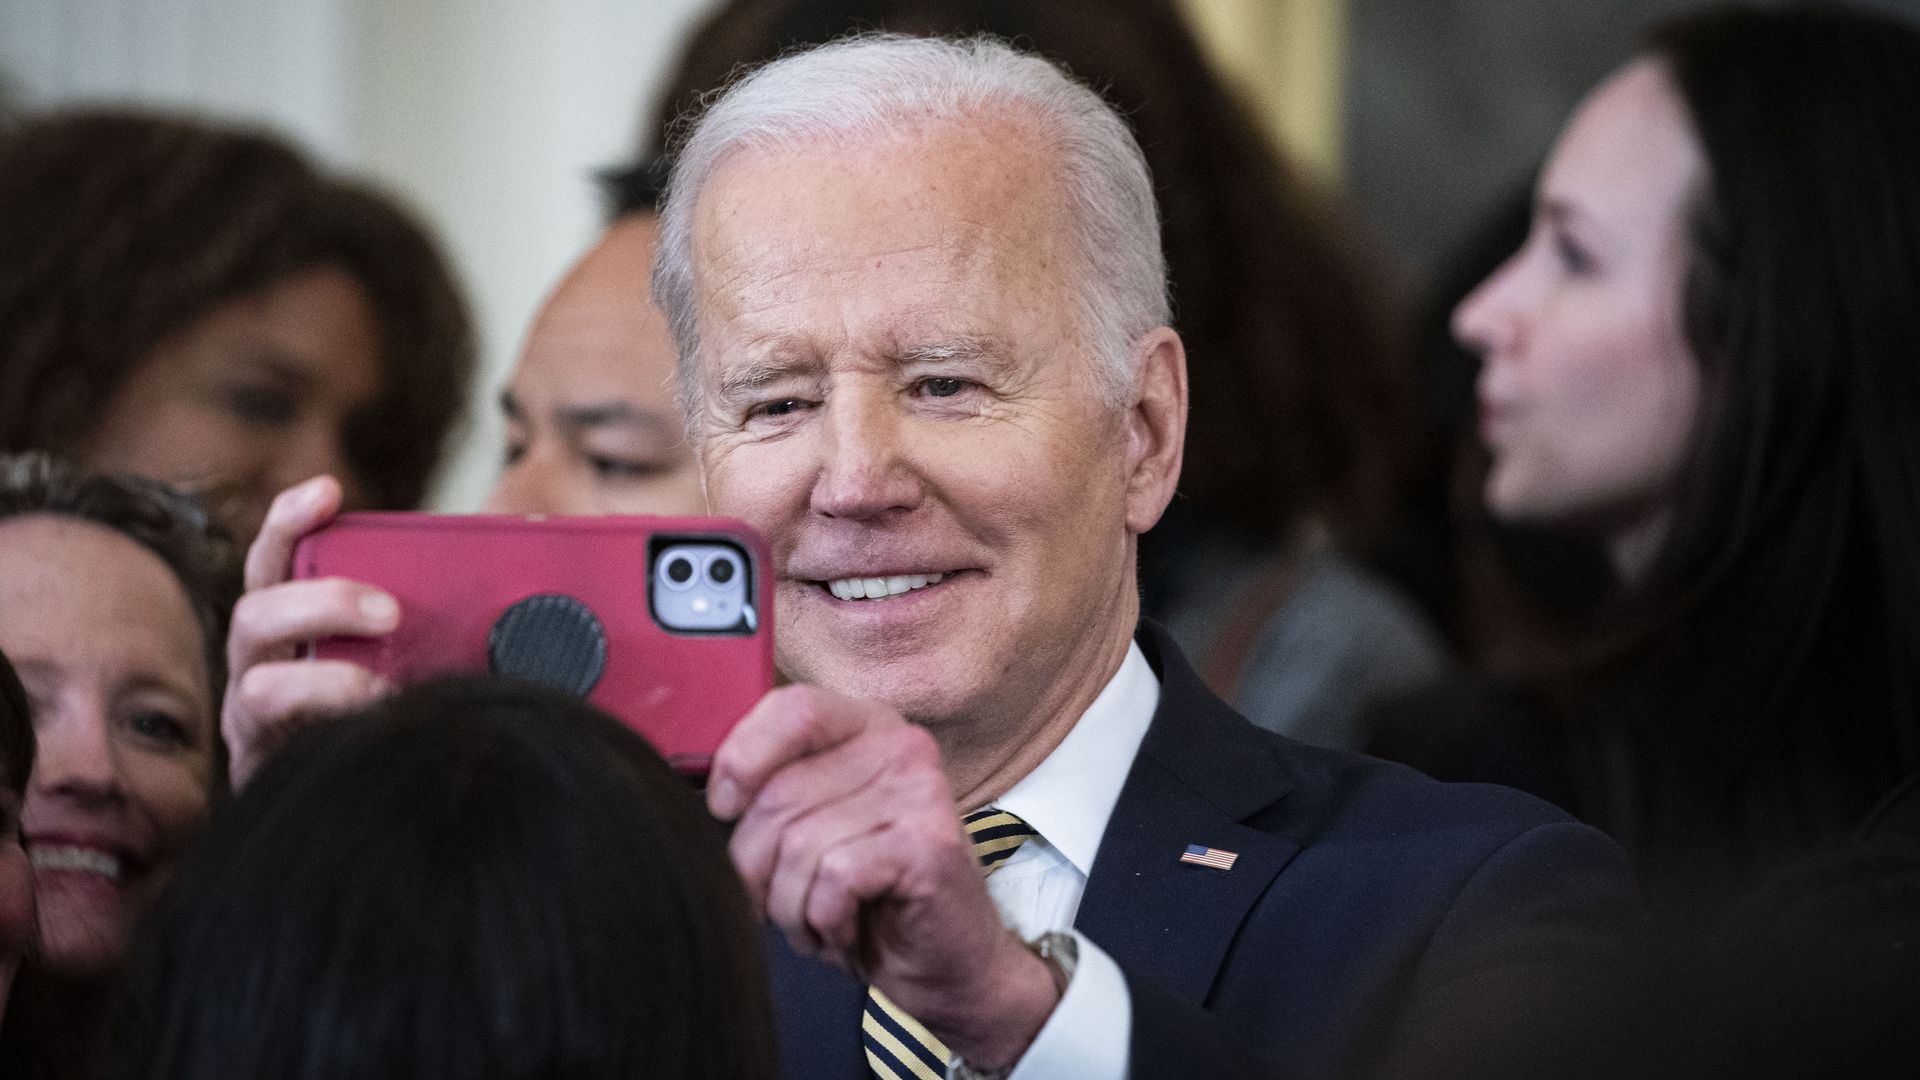 President Biden is seen snapping a photo with an iPhone.